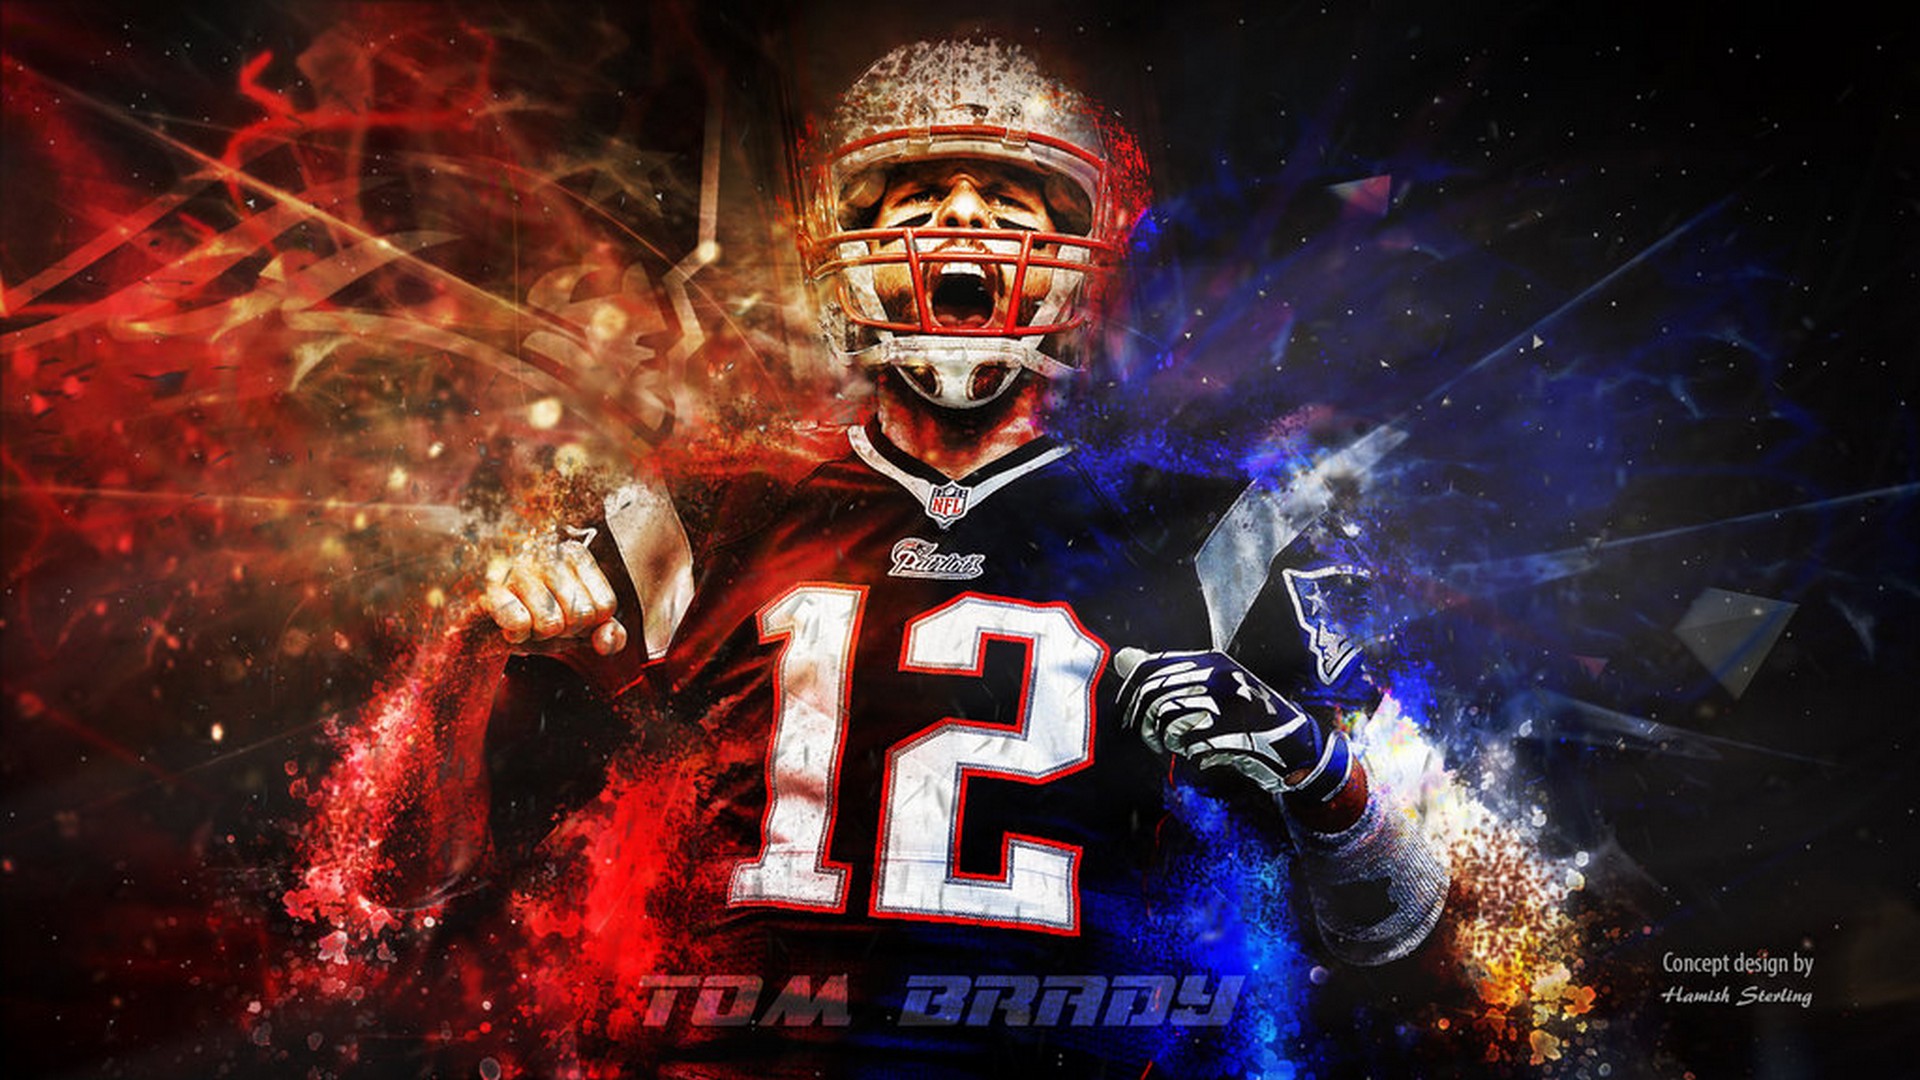 Wallpaper Tom Brady Goat Desktop with image resolution 1920x1080 pixel. You can use this wallpaper as background for your desktop Computer Screensavers, Android or iPhone smartphones